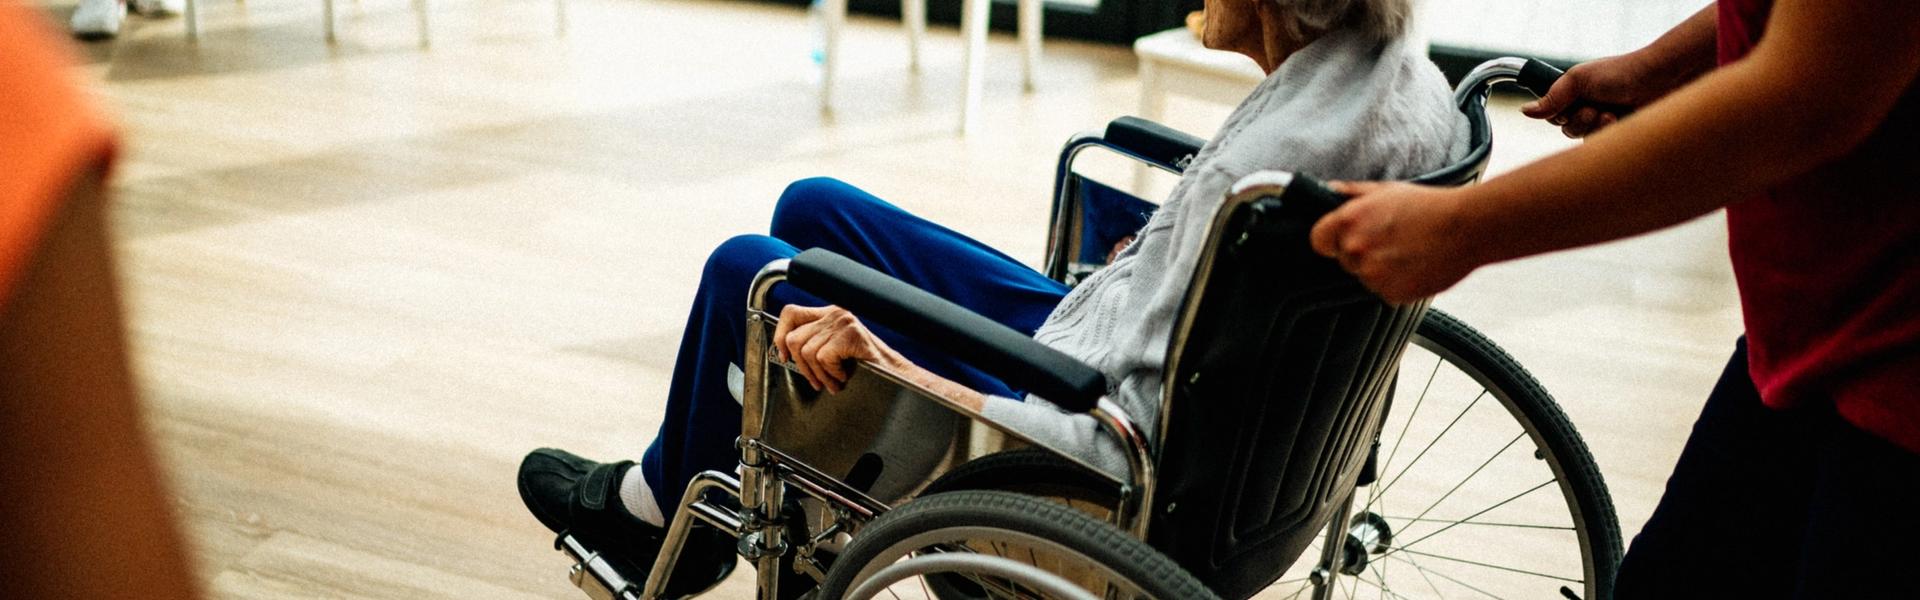 Nursing Home Neglect vs. Abuse: What's the Difference, and What Does It Mean for Your Case?